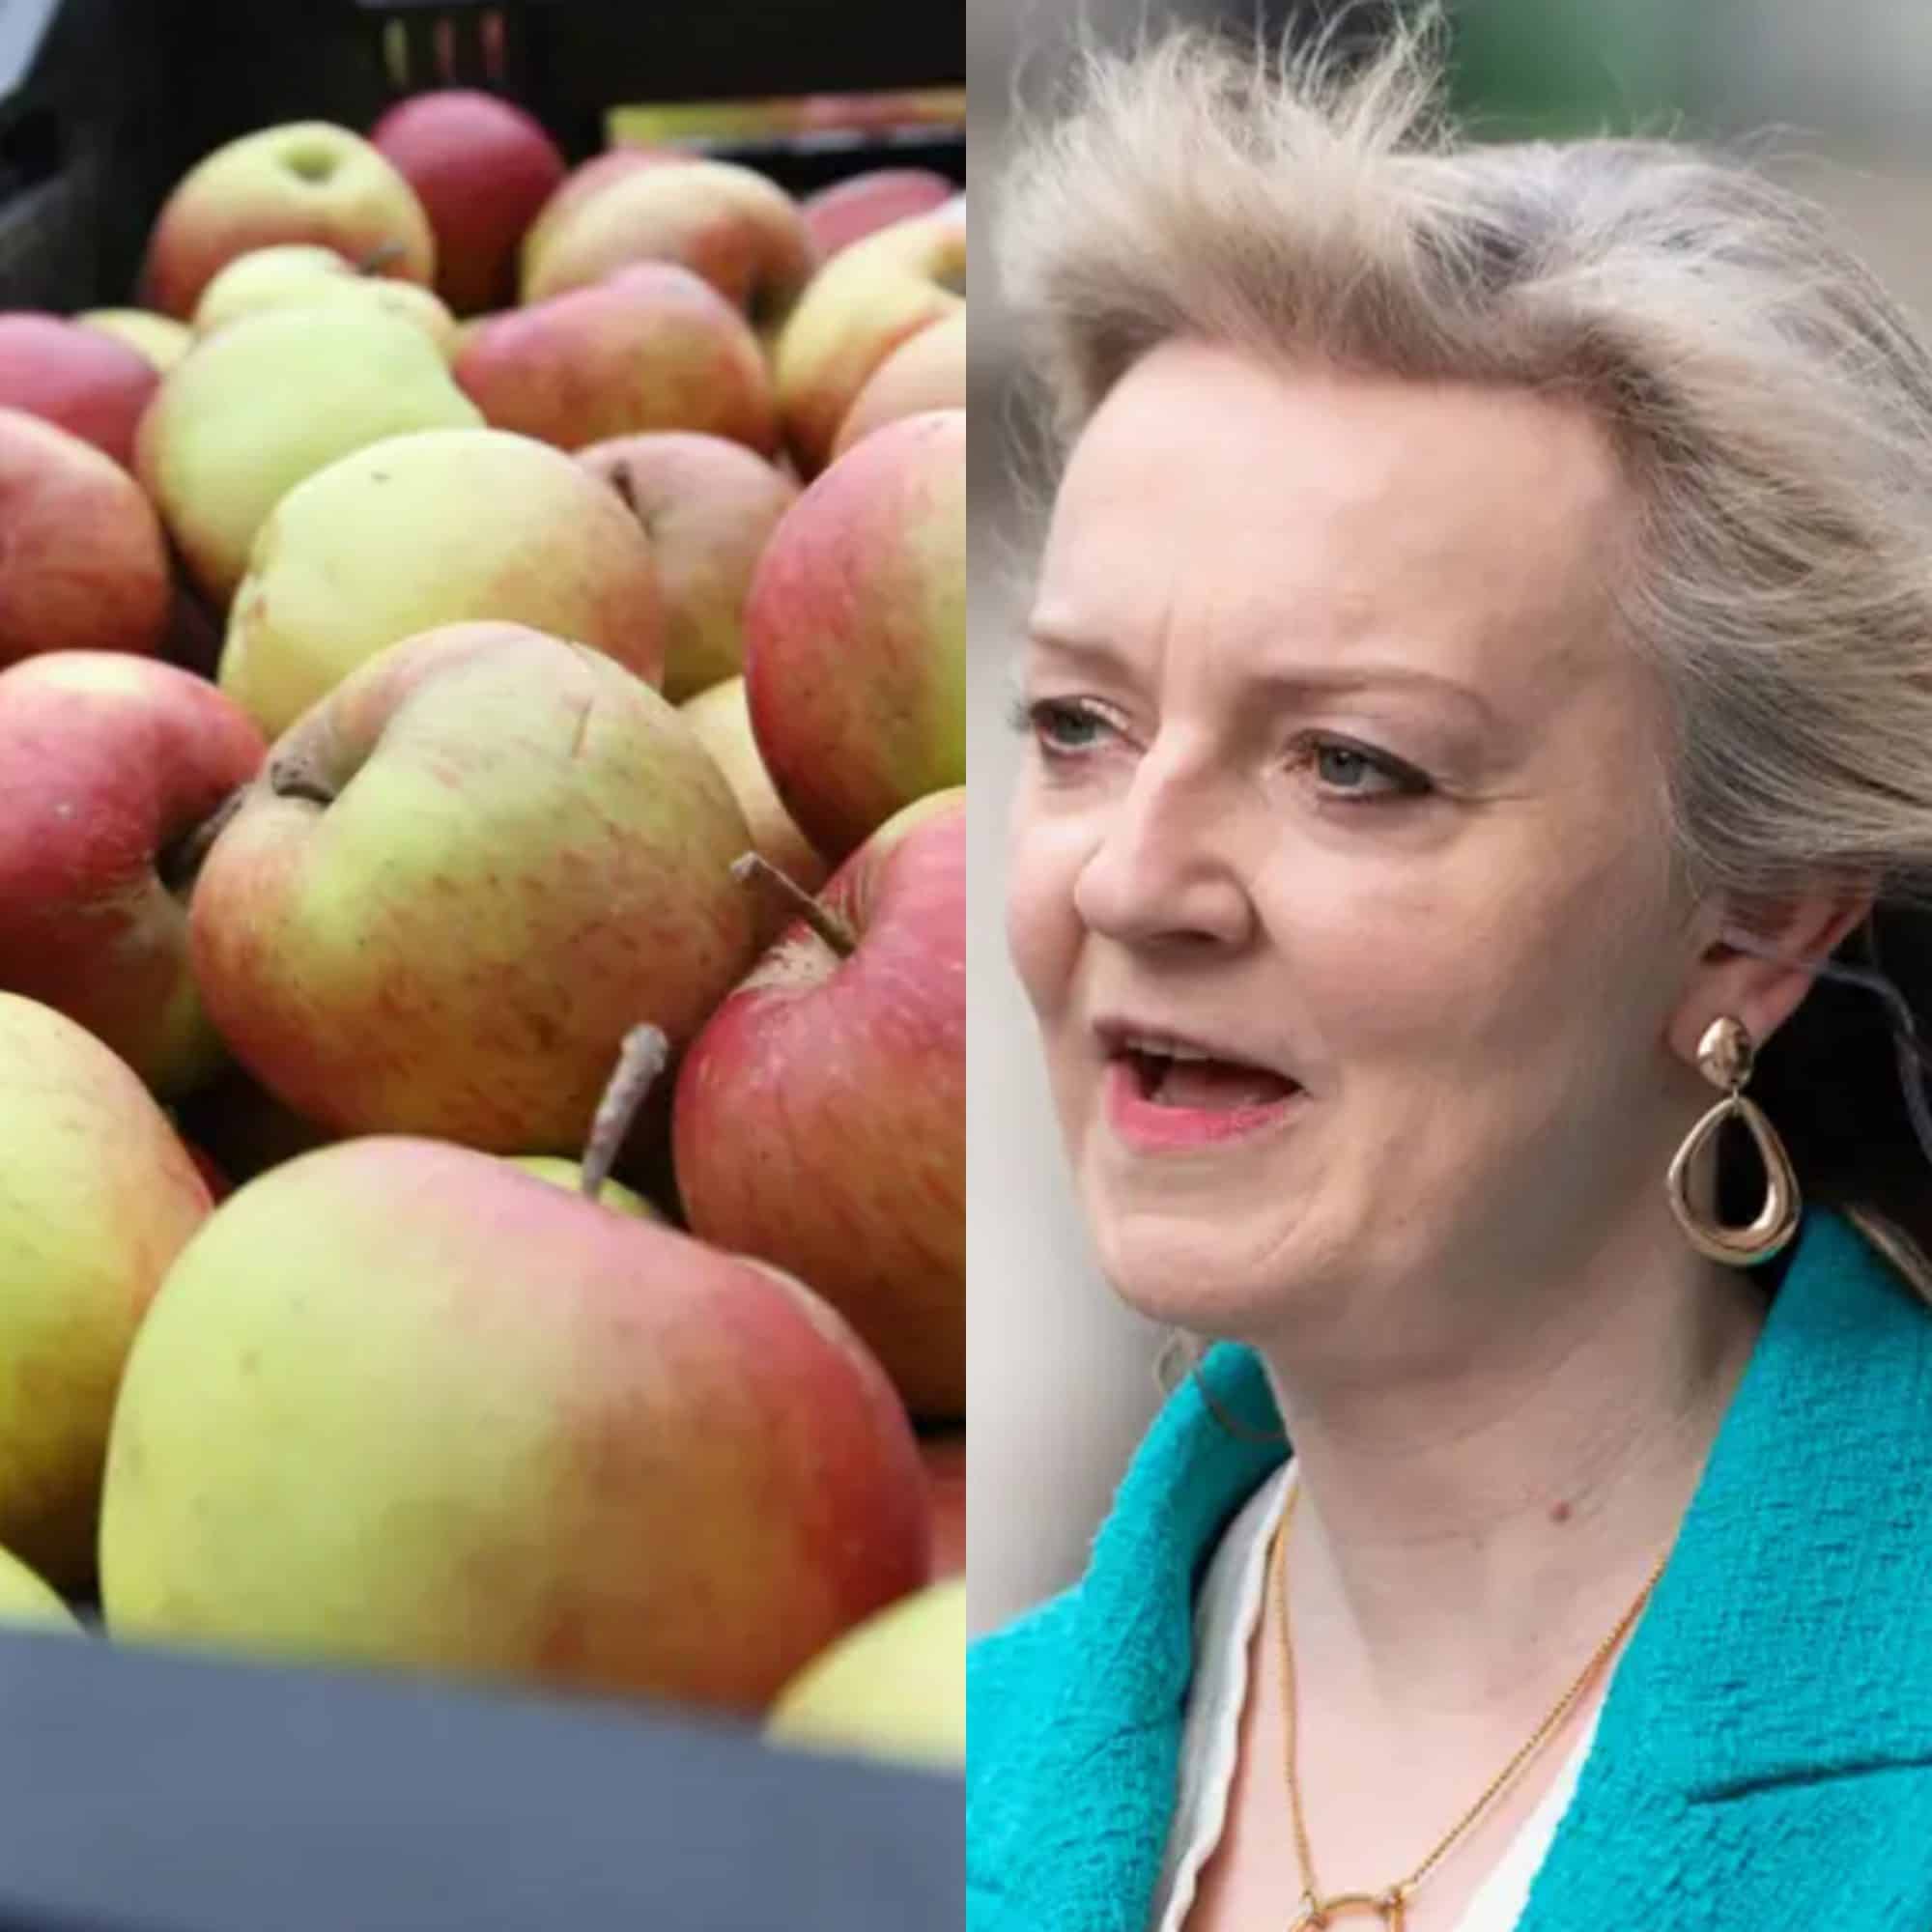 Liz Truss tried to boast about exporting apples to India. It didn’t go well.